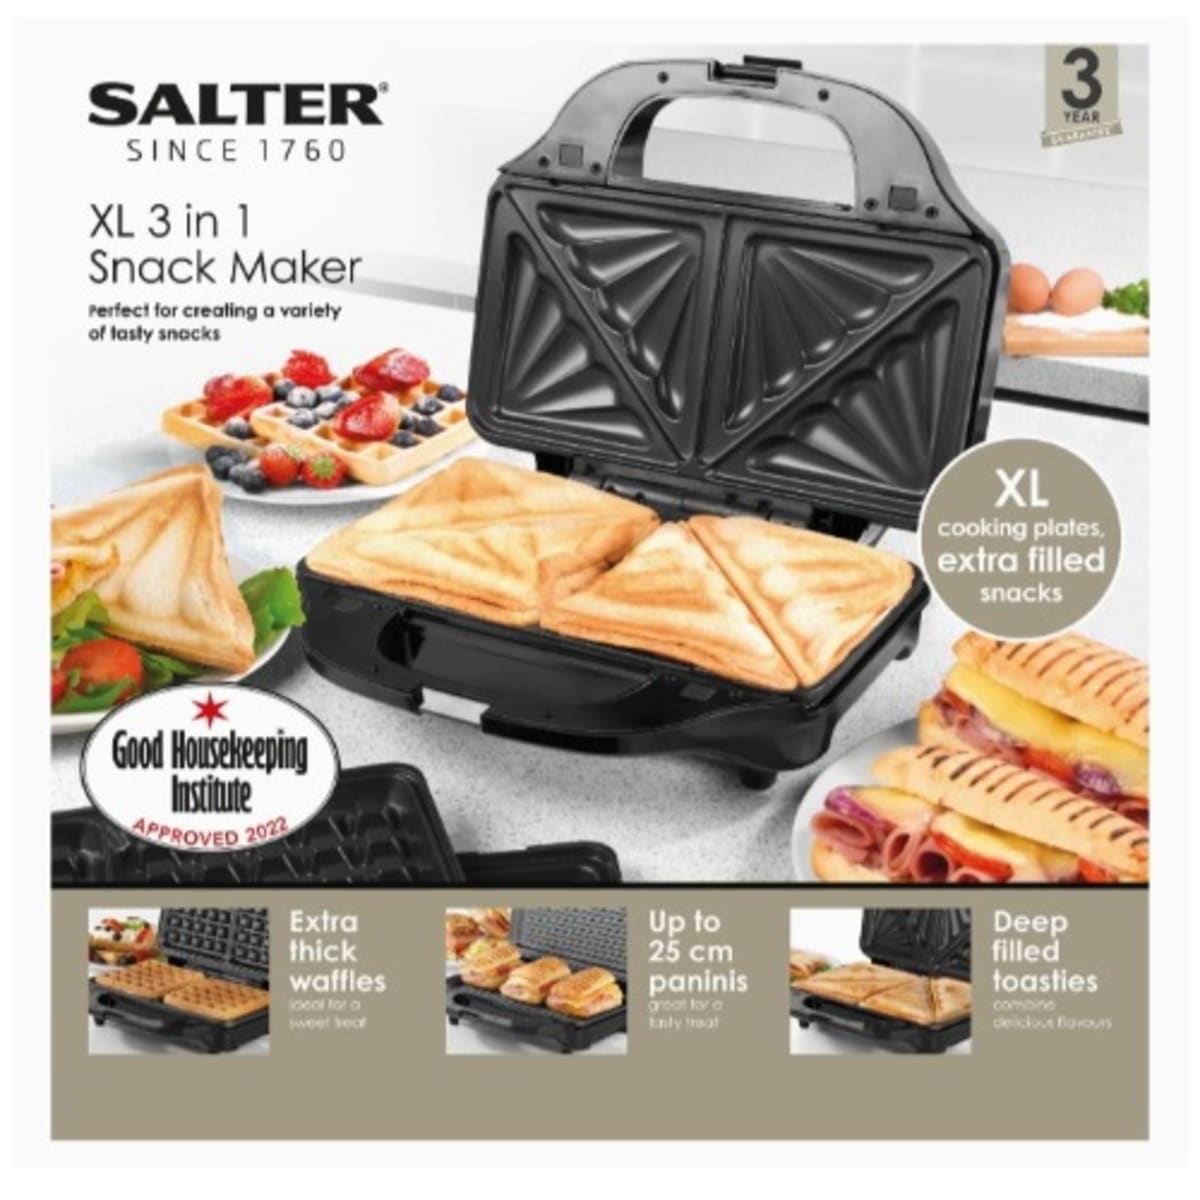 Salter XL 3 in 1 Snack Maker Unboxing In 2020 